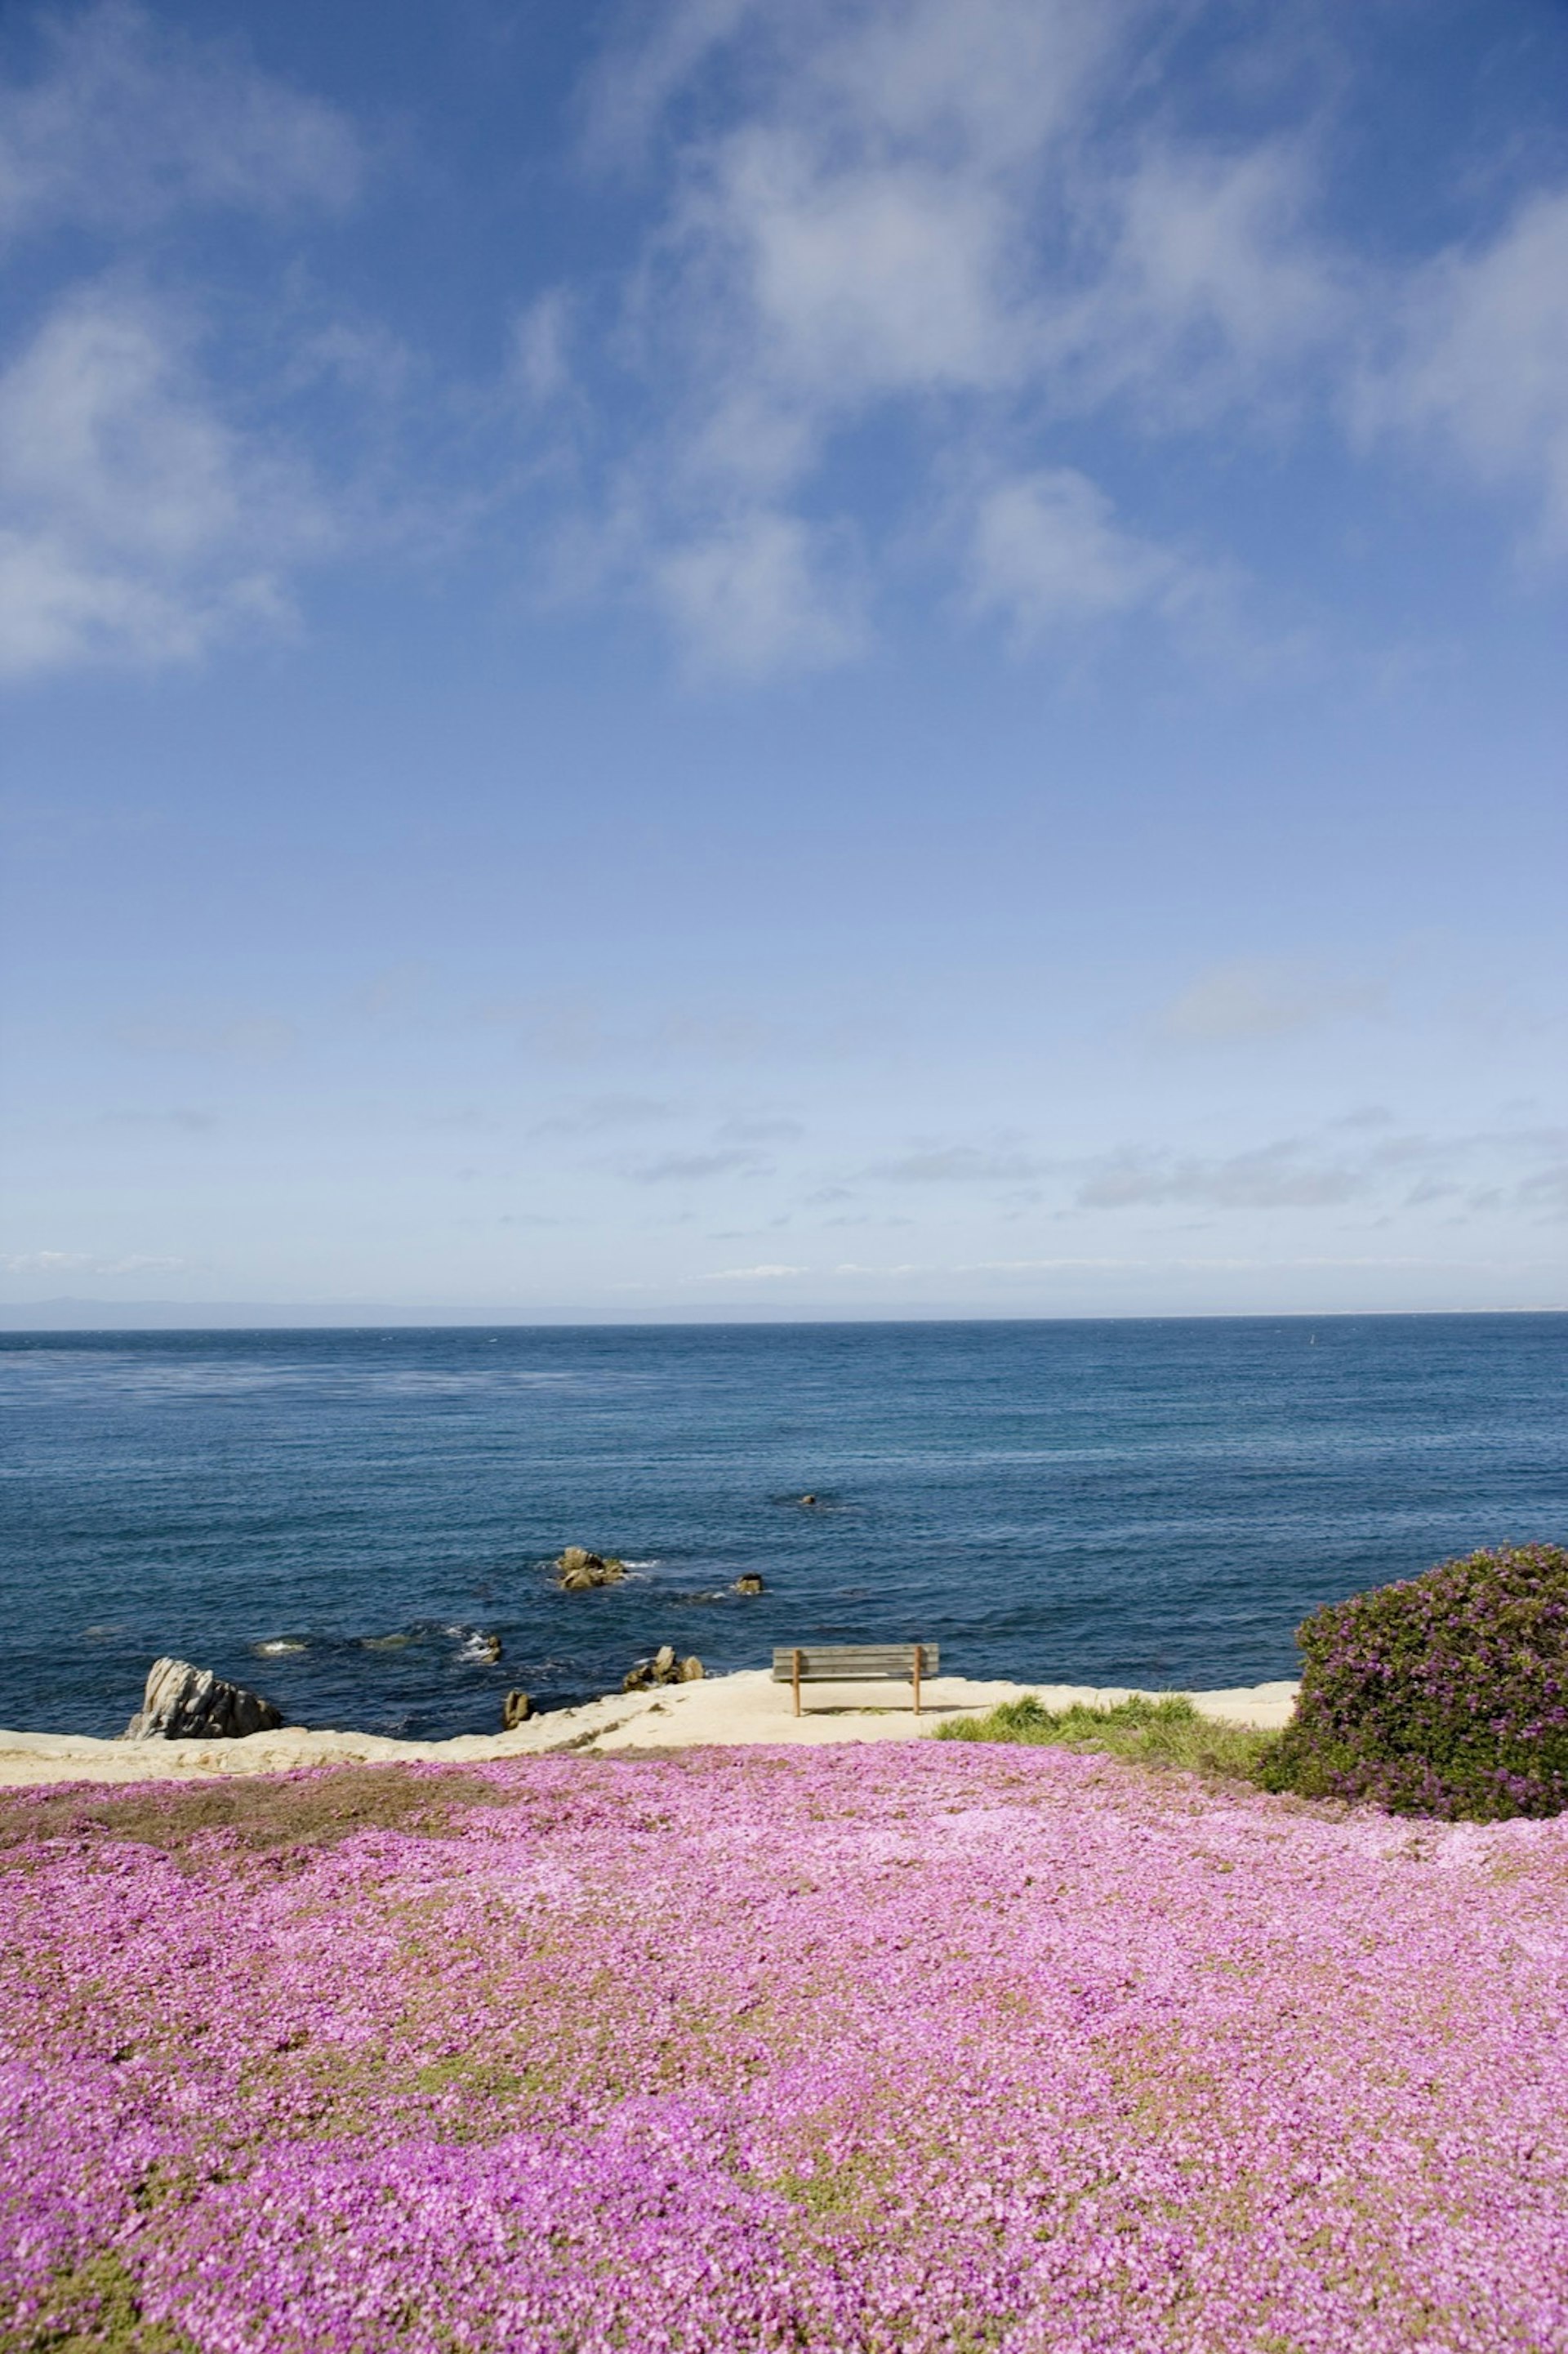 Lavender blooms down a hill with the ocean in the background